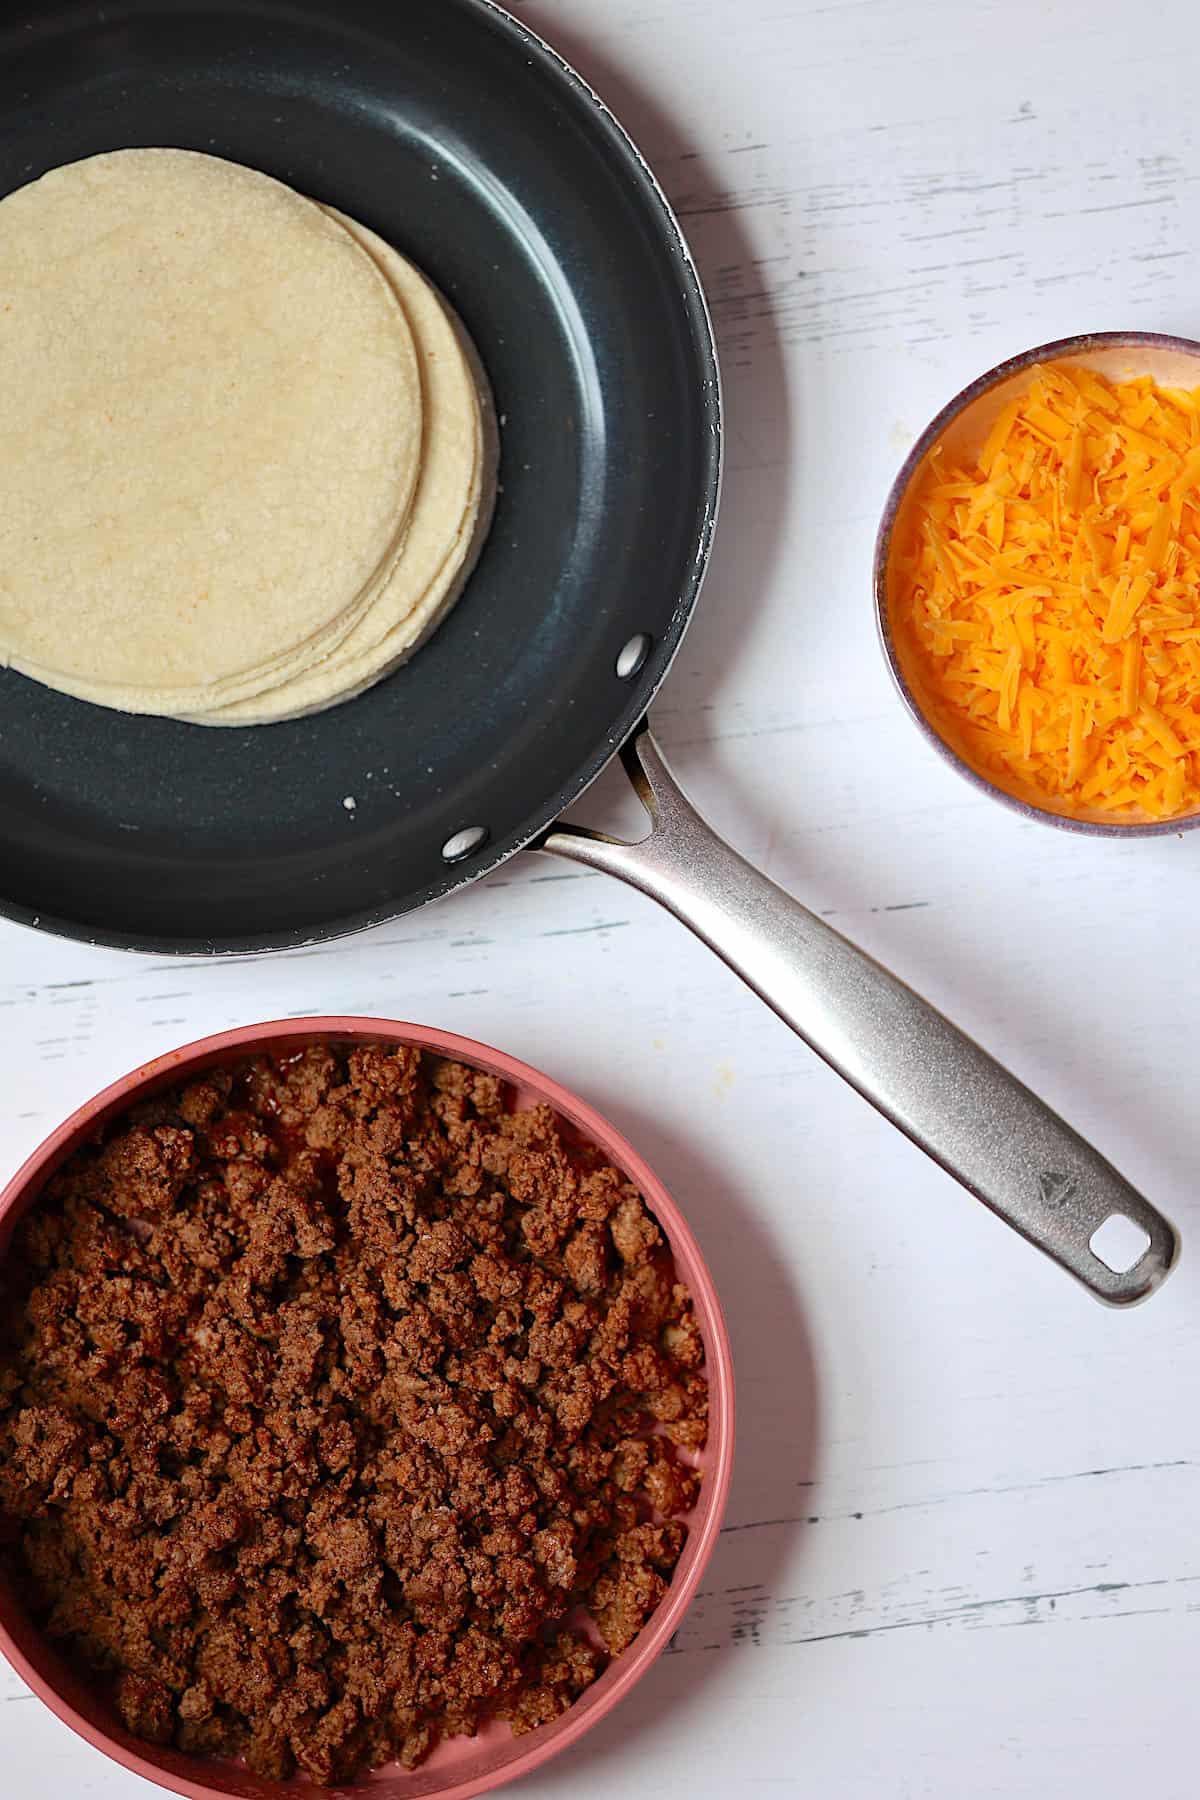 corn tortillas, ground beef, and cheddar cheese